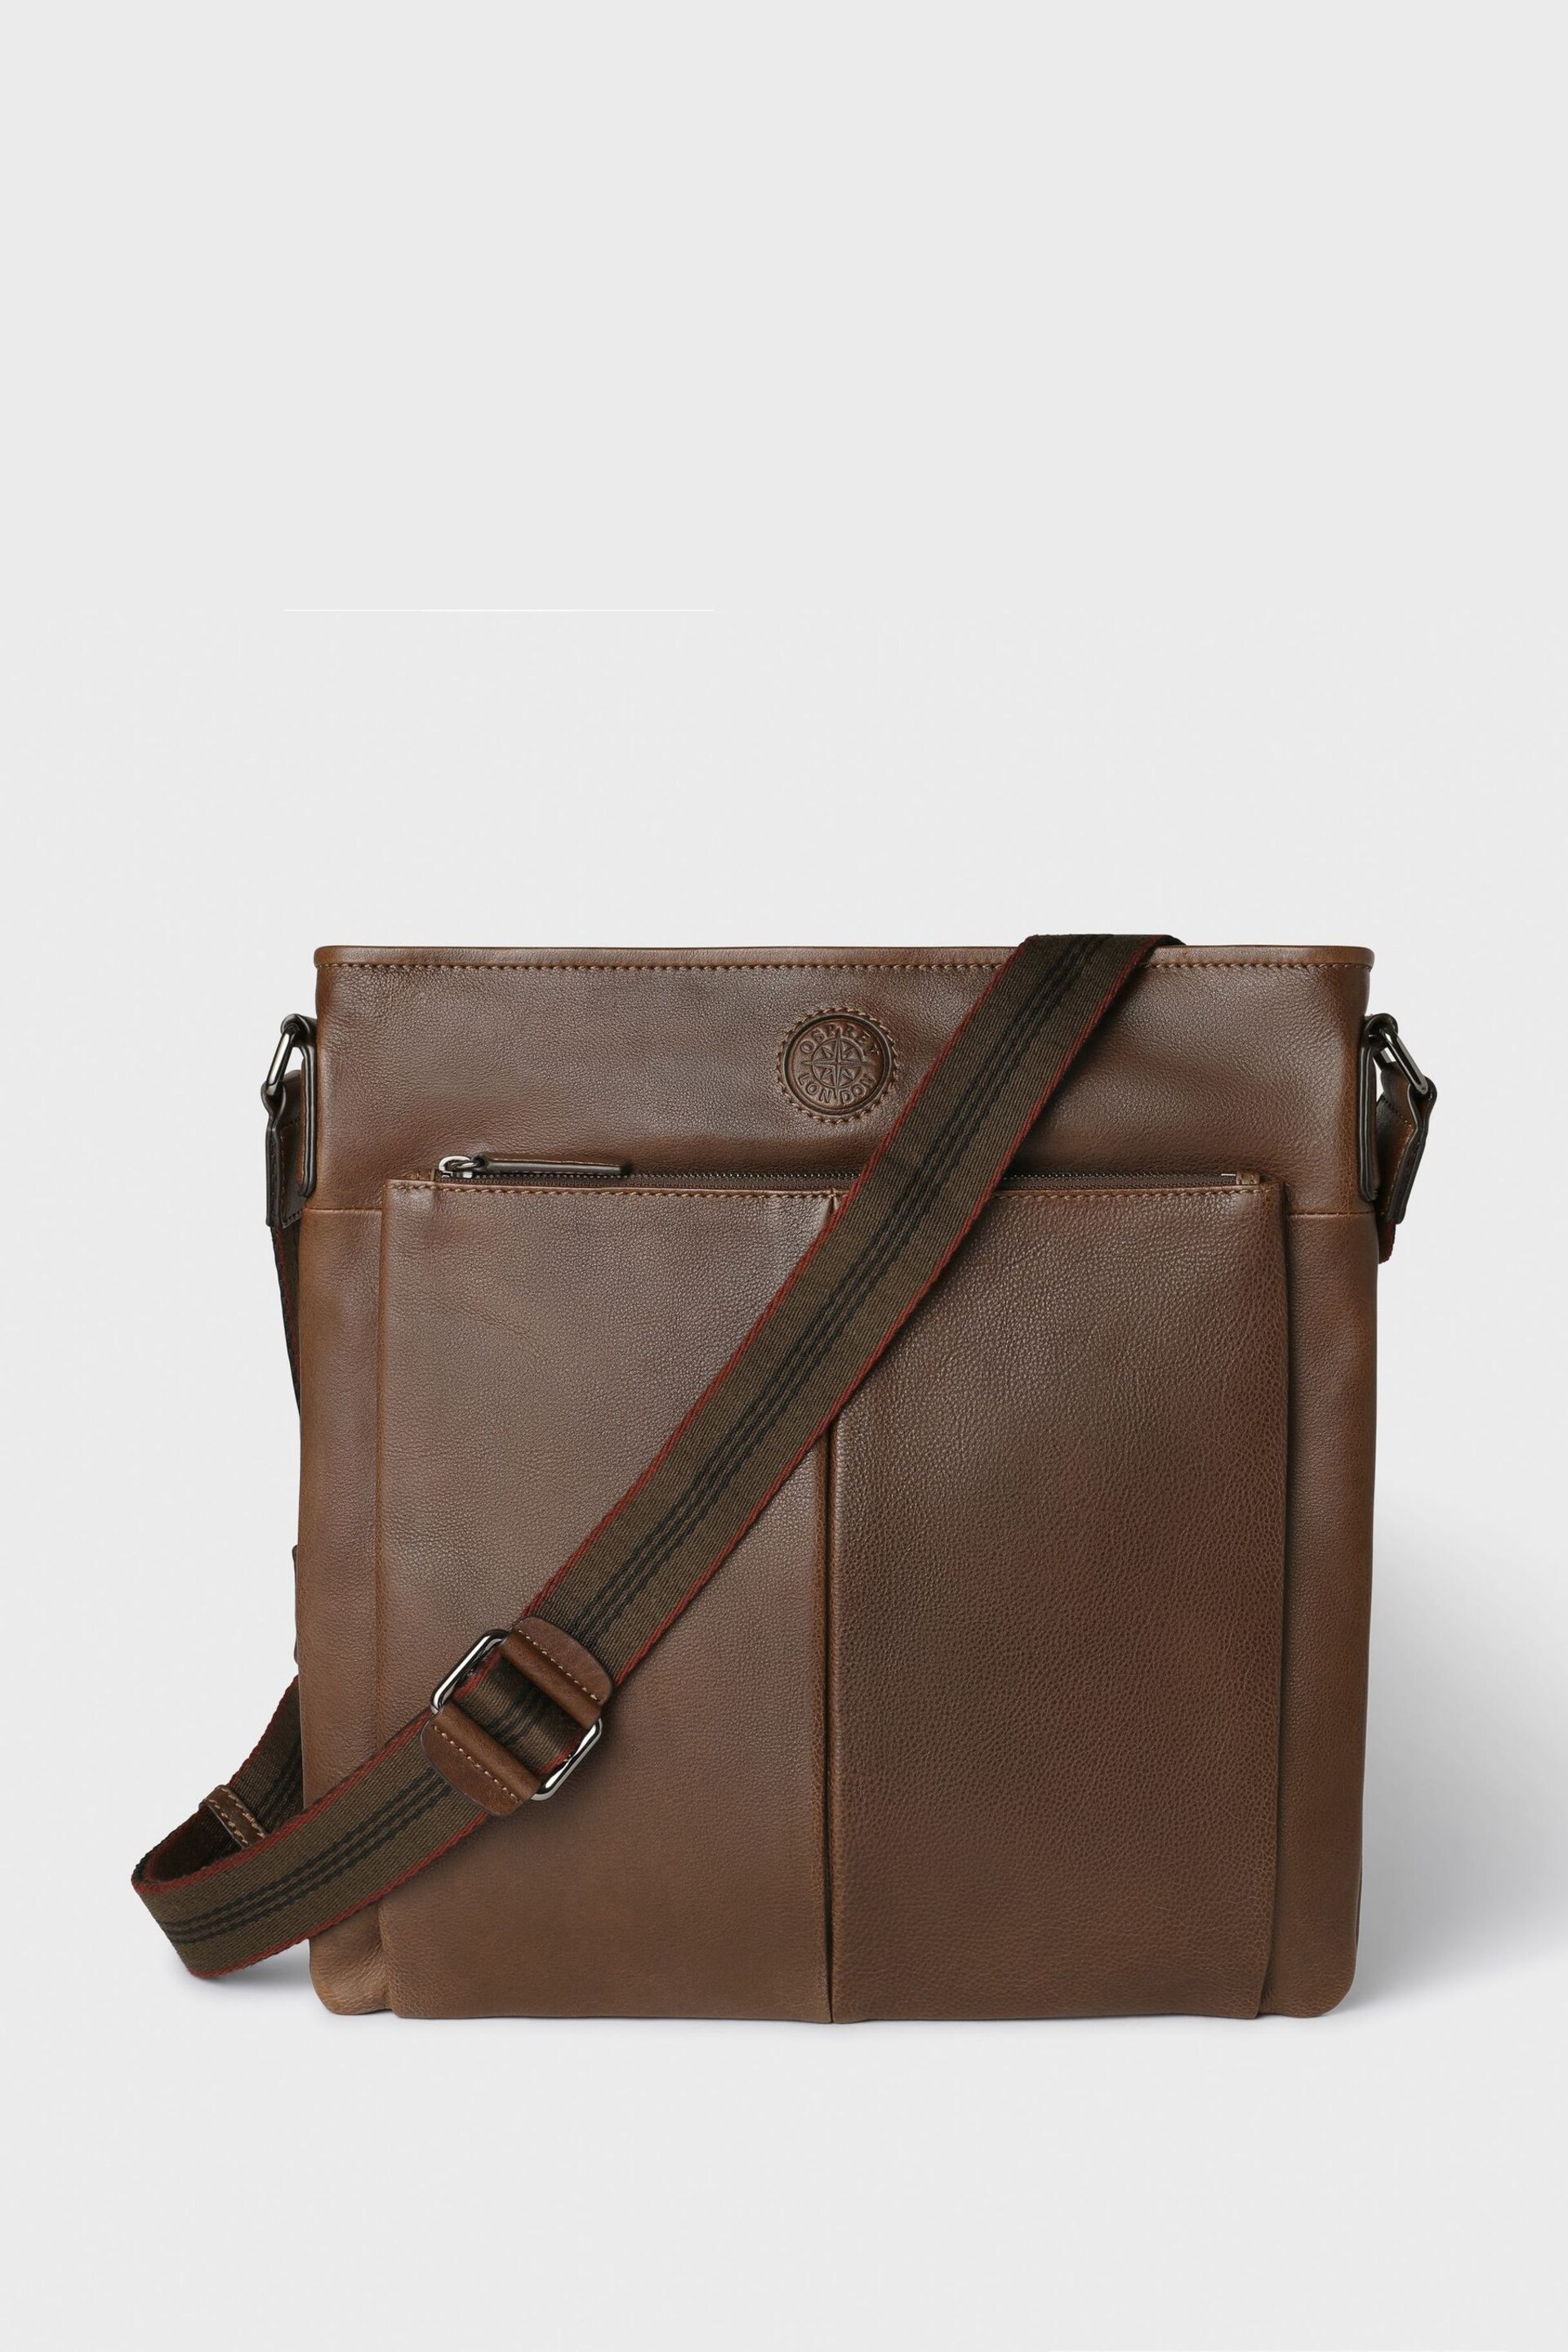 Osprey London The Compass Leather Cross-Body Brown Bag - Image 1 of 5